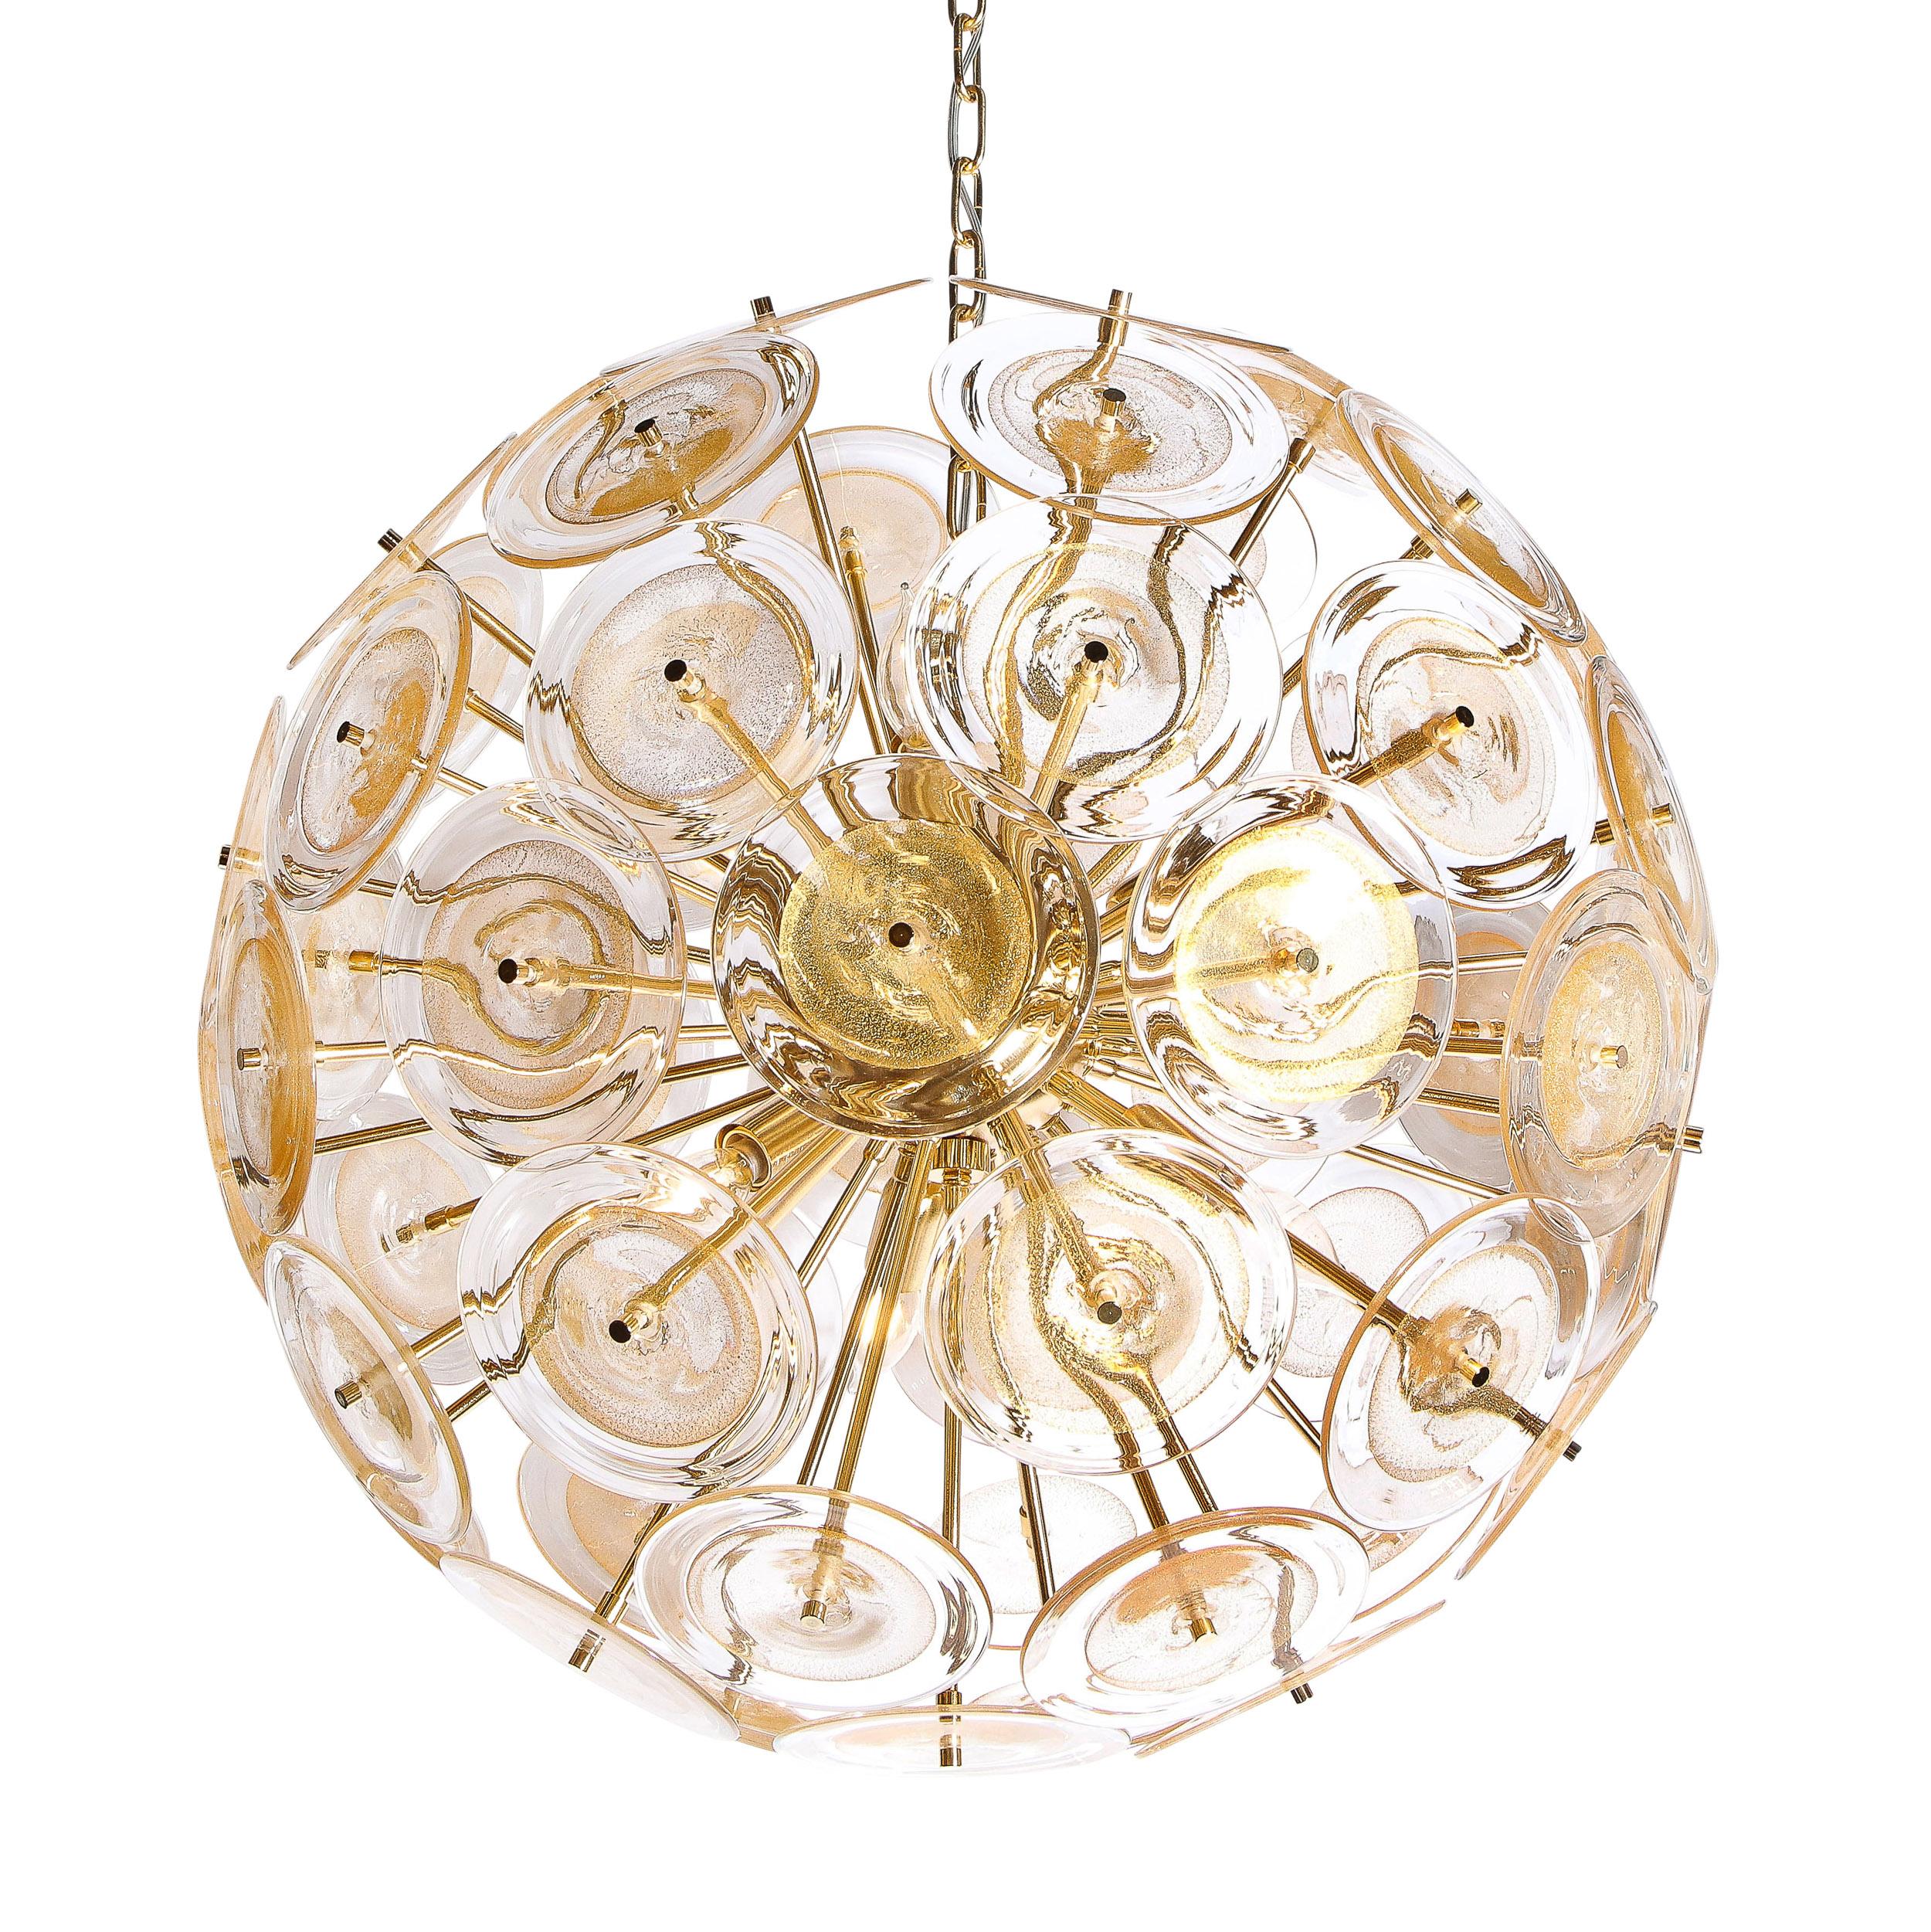 This dramatic and graphic Sputnik was realized in Murano, Italy- the island off the coast of Venice renowned for centuries for its superlative glass production. It features a wealth of brushed brass rods emanating from circular body of the same